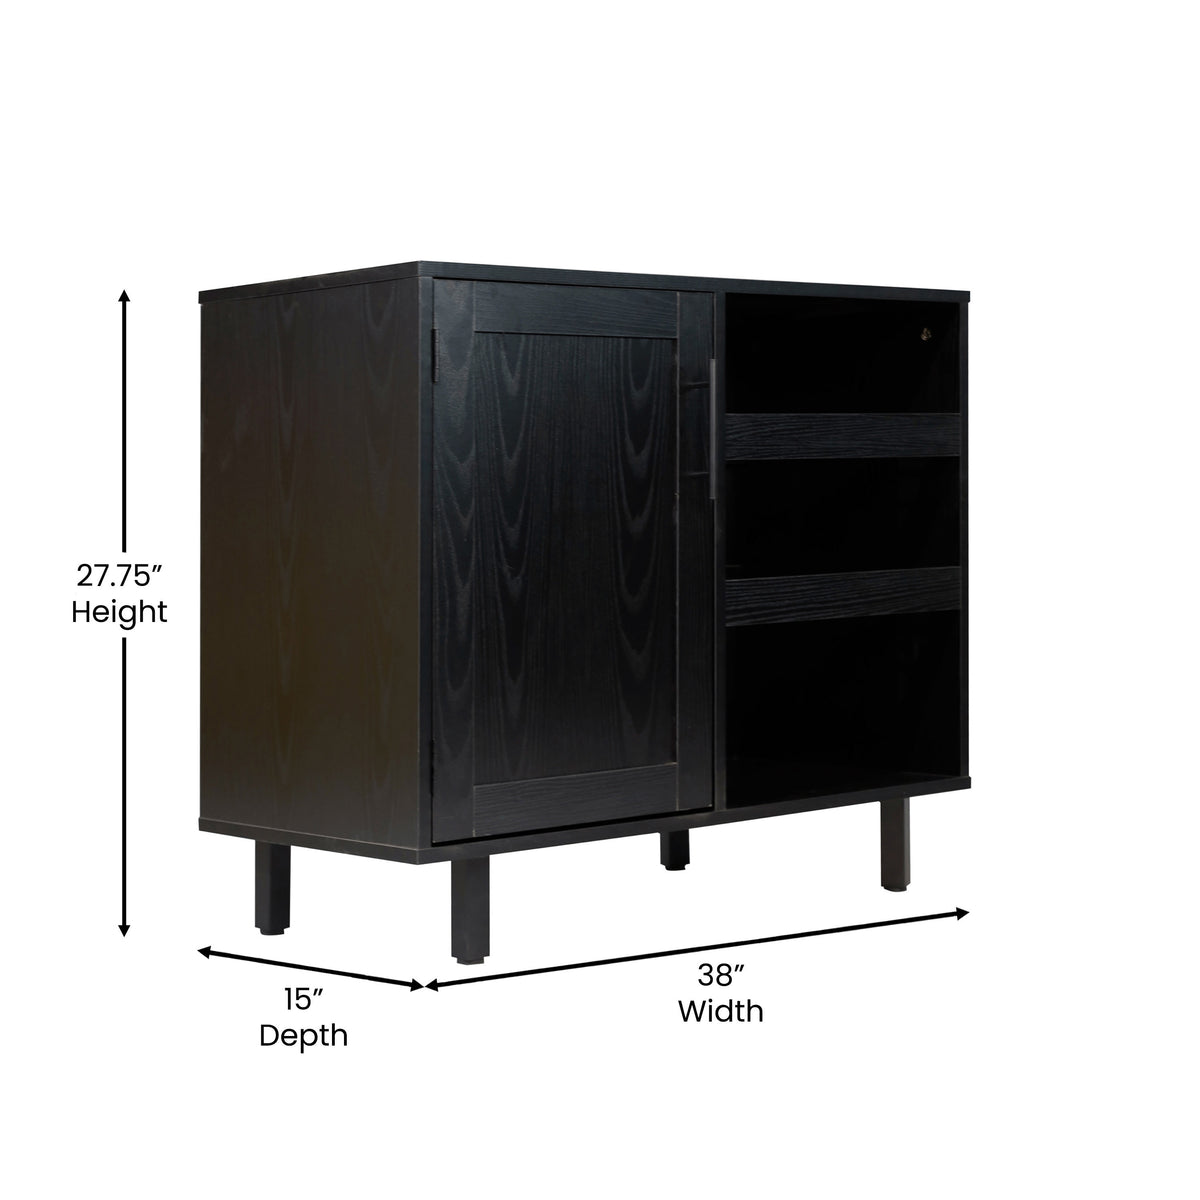 Black |#| Classic Sideboard and Bar Cabinet with Open and Closed Storage - Black